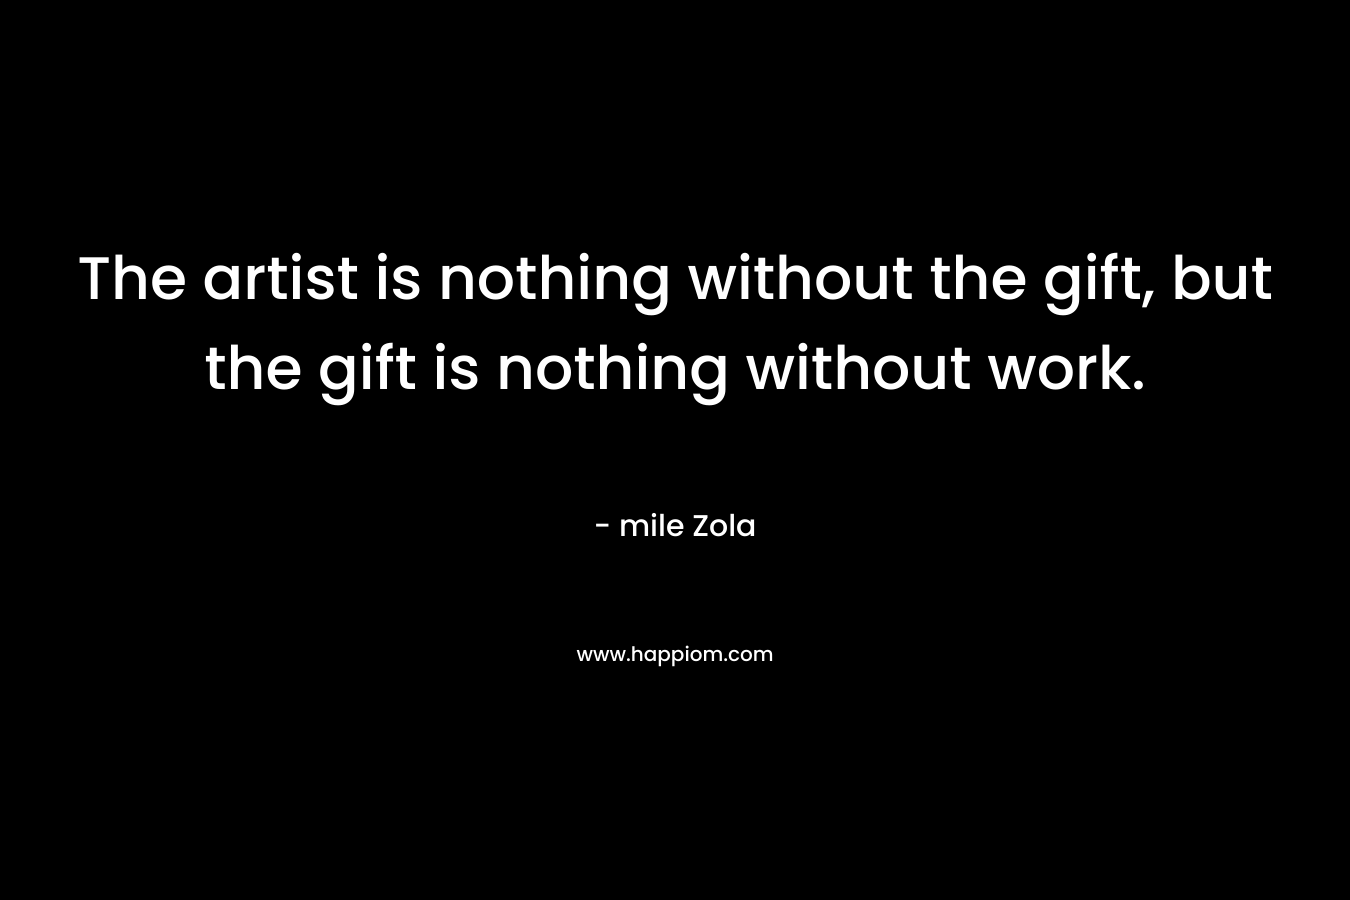 The artist is nothing without the gift, but the gift is nothing without work.